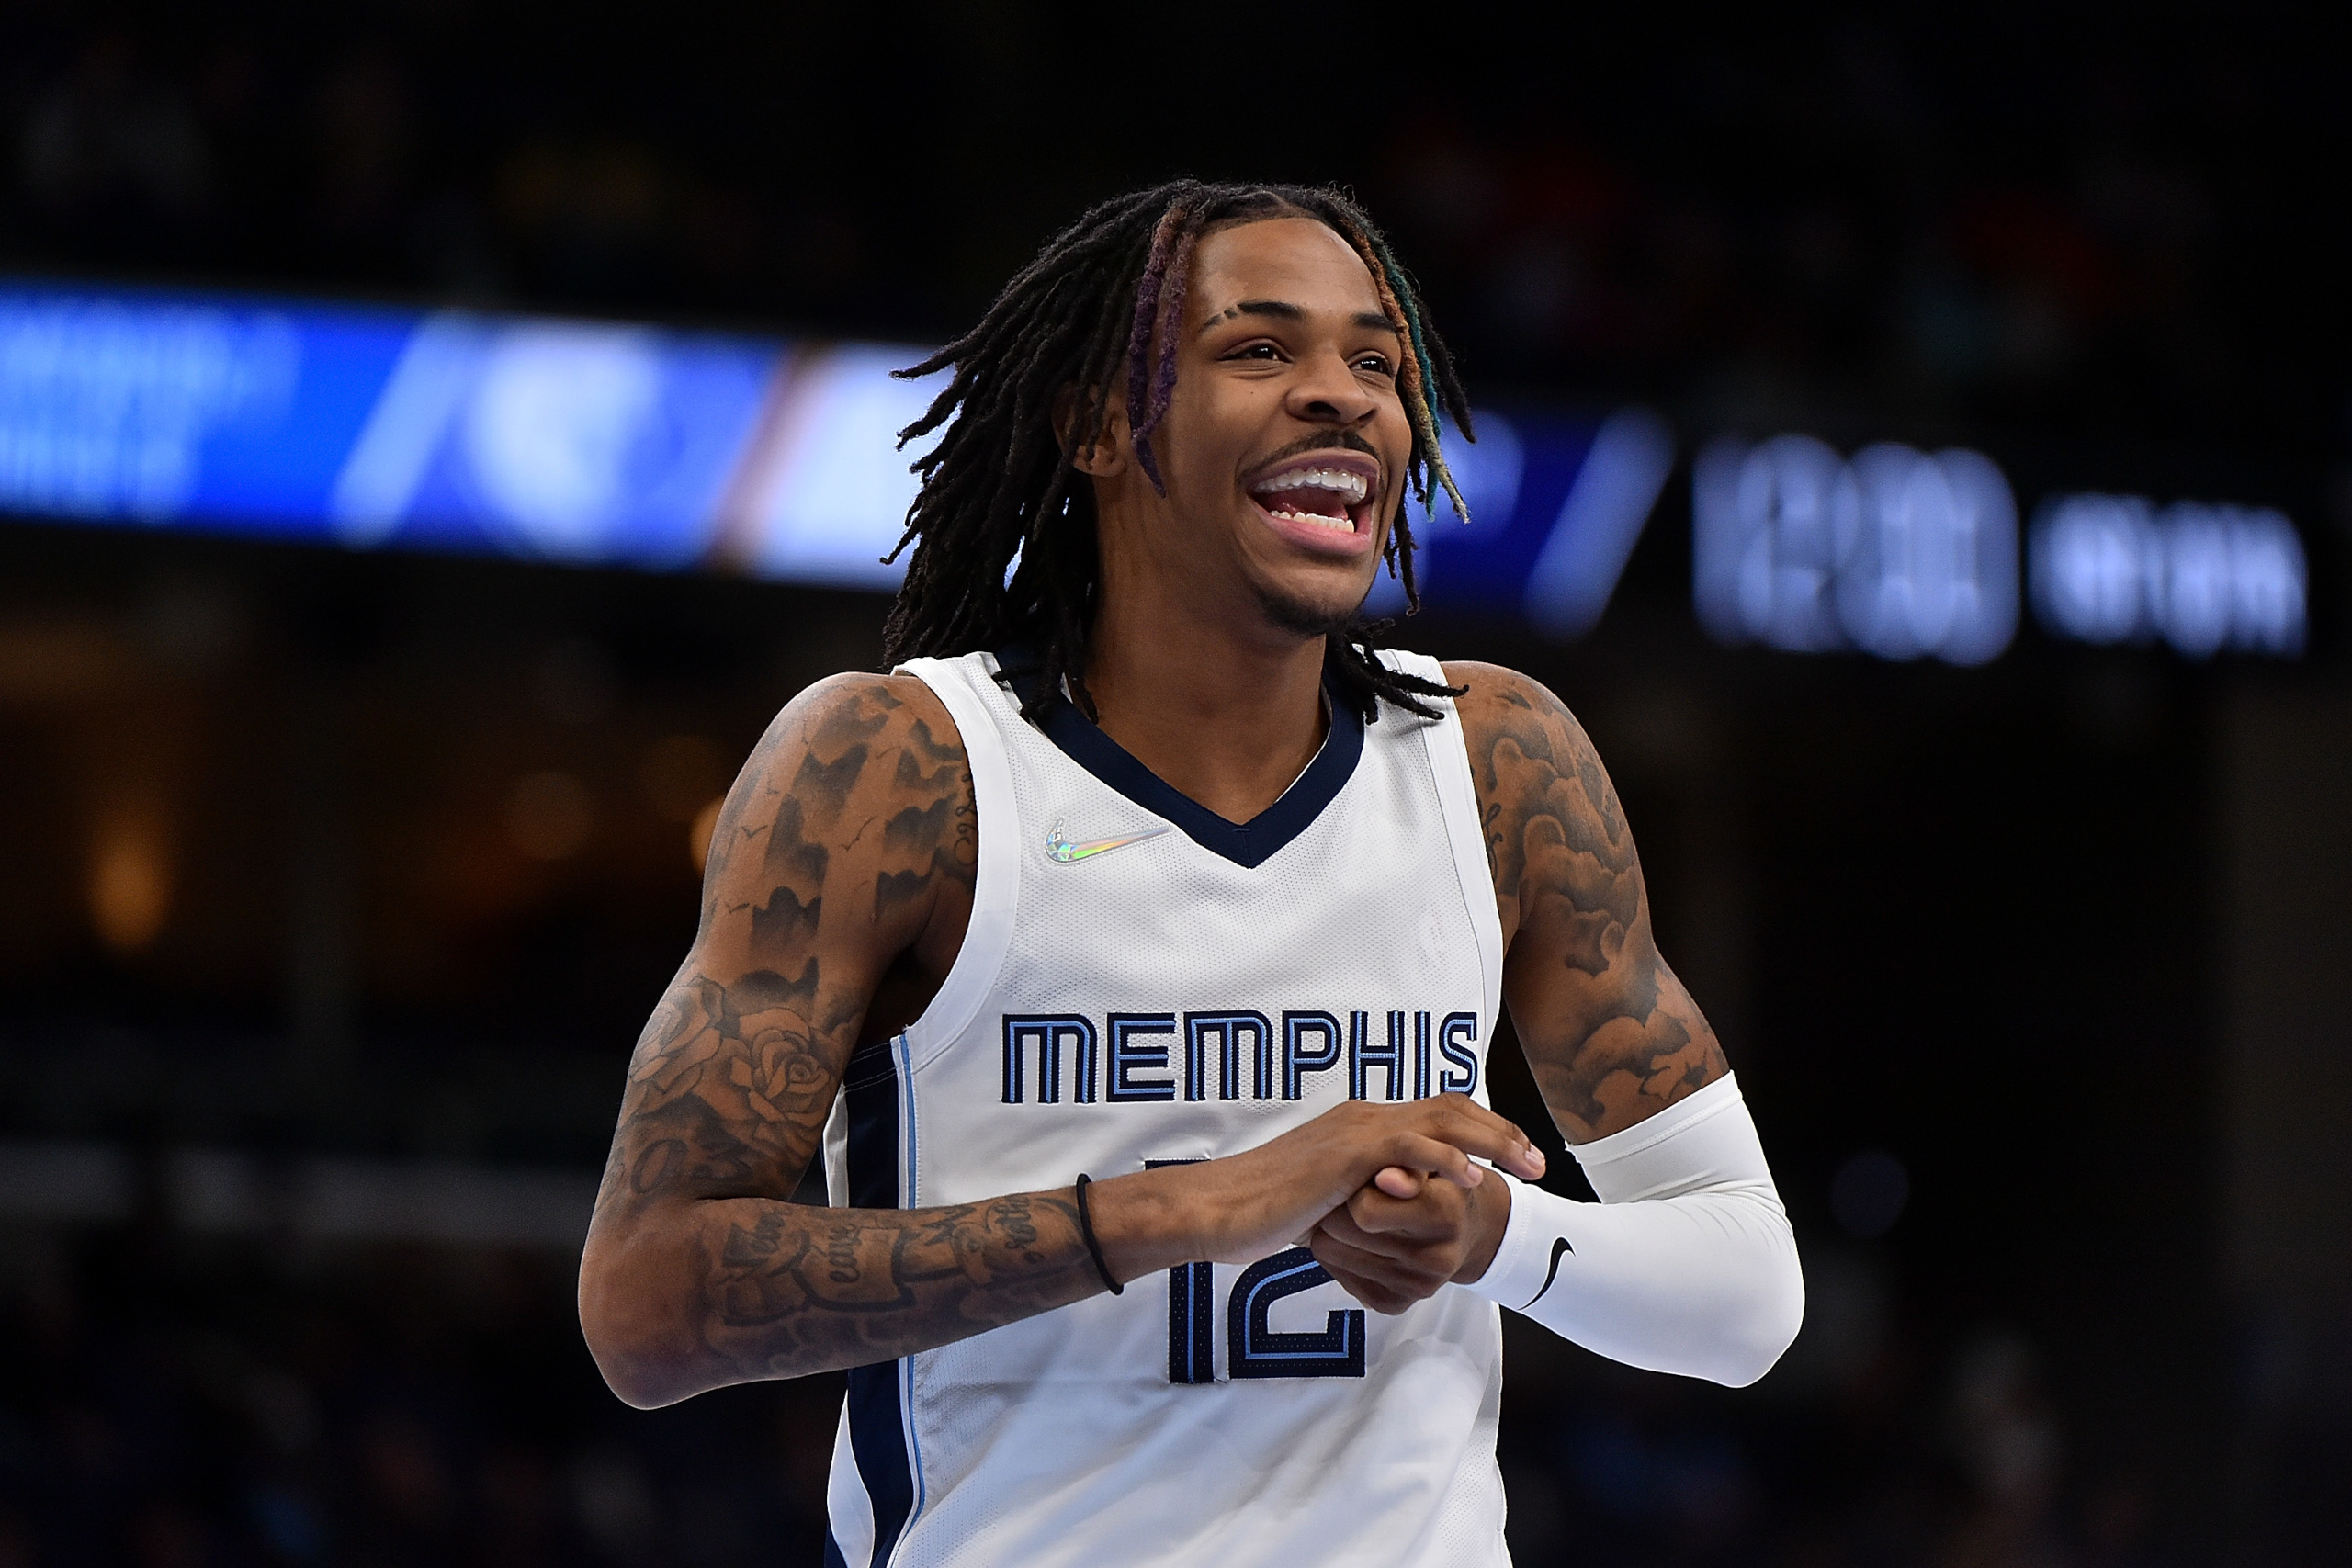 Memphis Grizzlies on Twitter RT if youve copped a JaMorant jersey  Salute our guy being among the top in NBA jersey sales  httpstcoSscVVYpT9f  Twitter